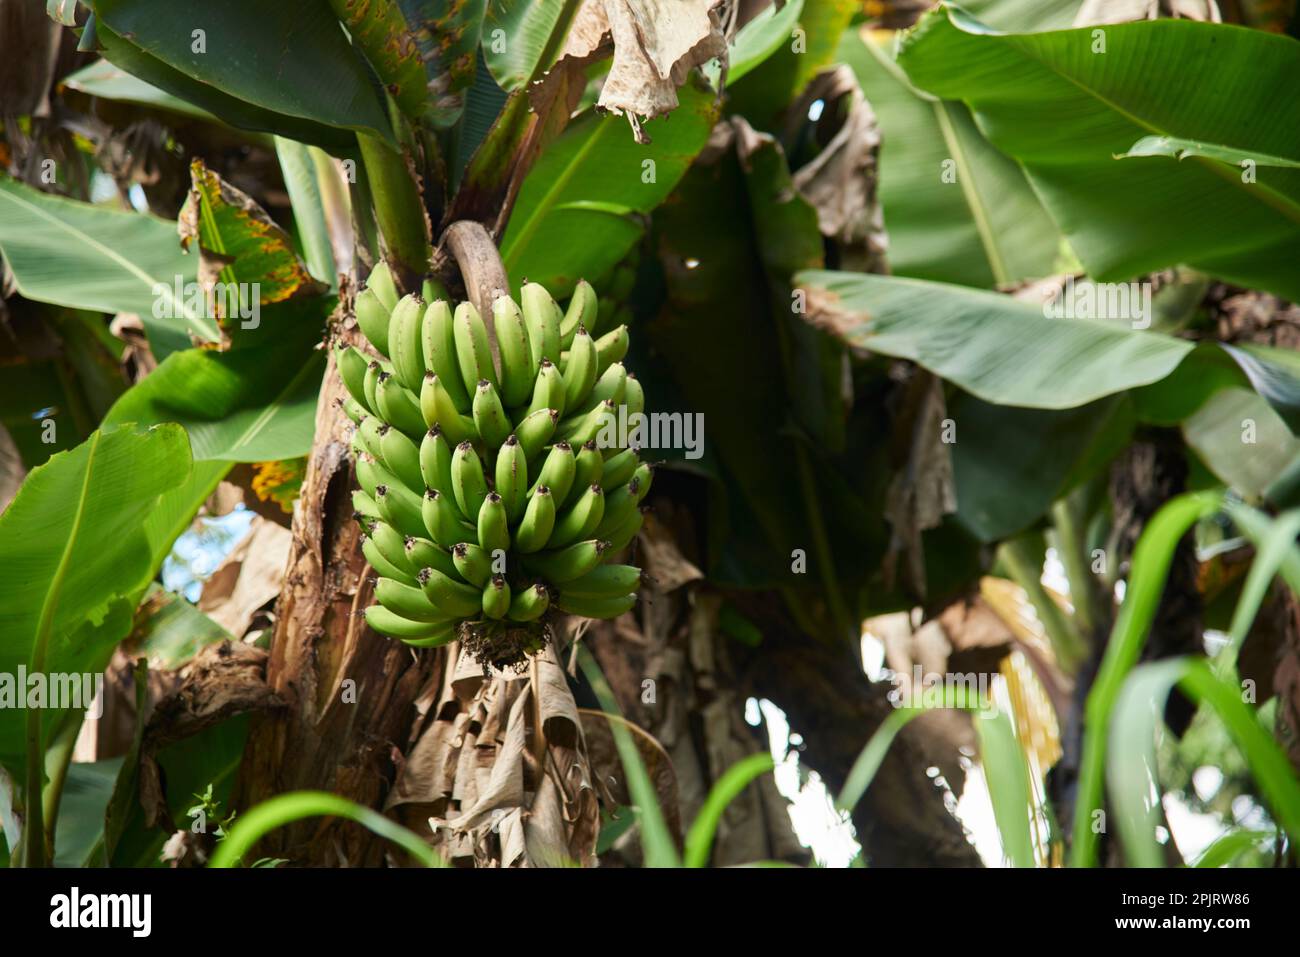 Bunch of green, unripe, bananas hanging from the palm tree, a staple crop in the cuisine of many tropical countries. Stock Photo